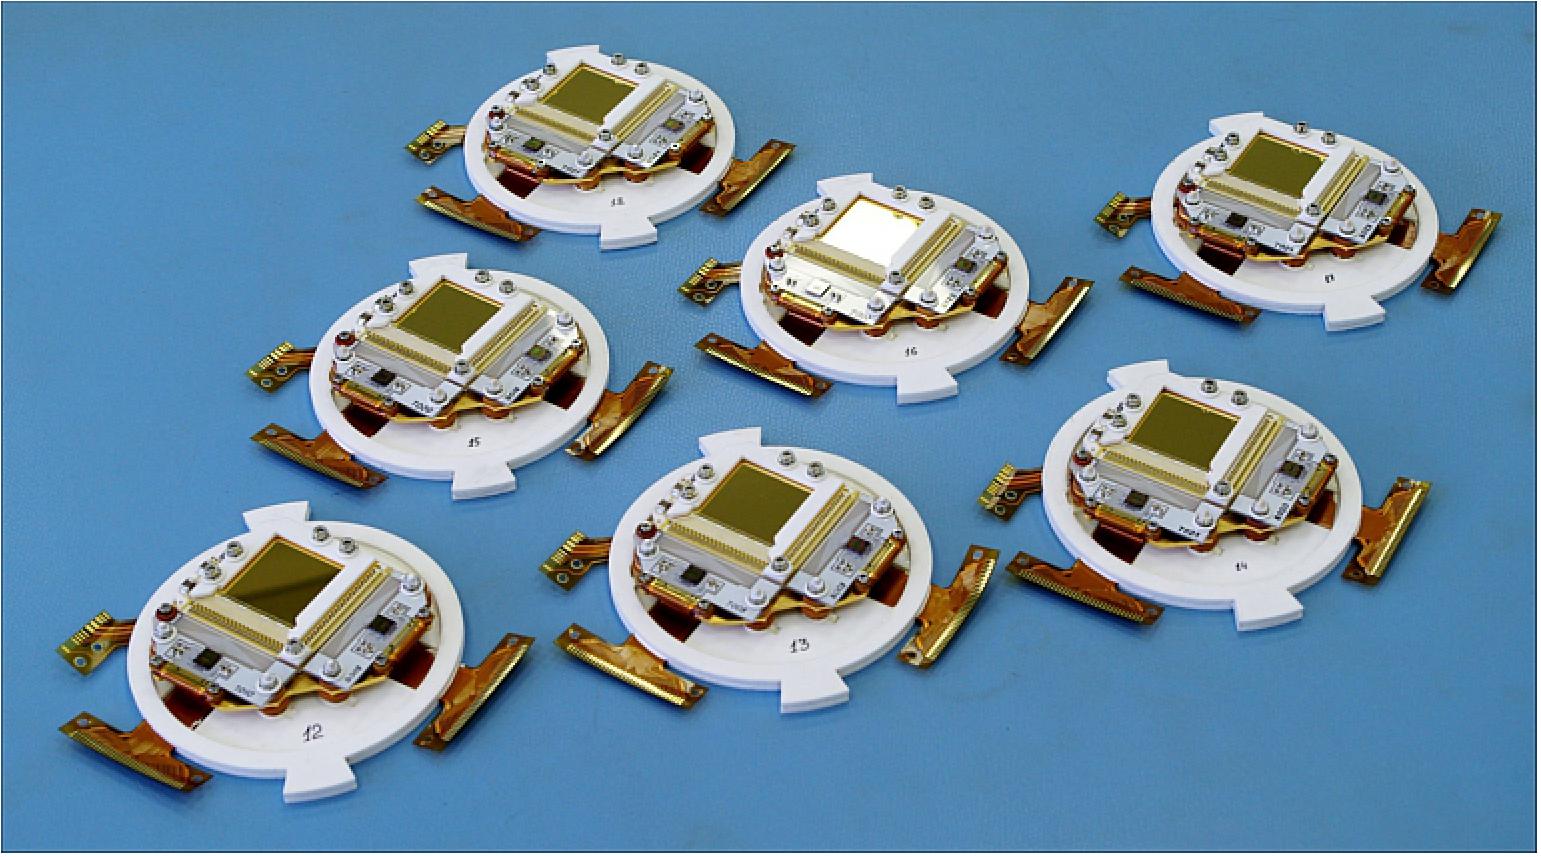 Figure 47: The detectors were designed and manufactured at IKI RAS. They are a semiconductor CdTe double-sided strip detectors which provide both good energy resolution (about 10% above 10 keV) and timing capabilities (image credit: IKI)